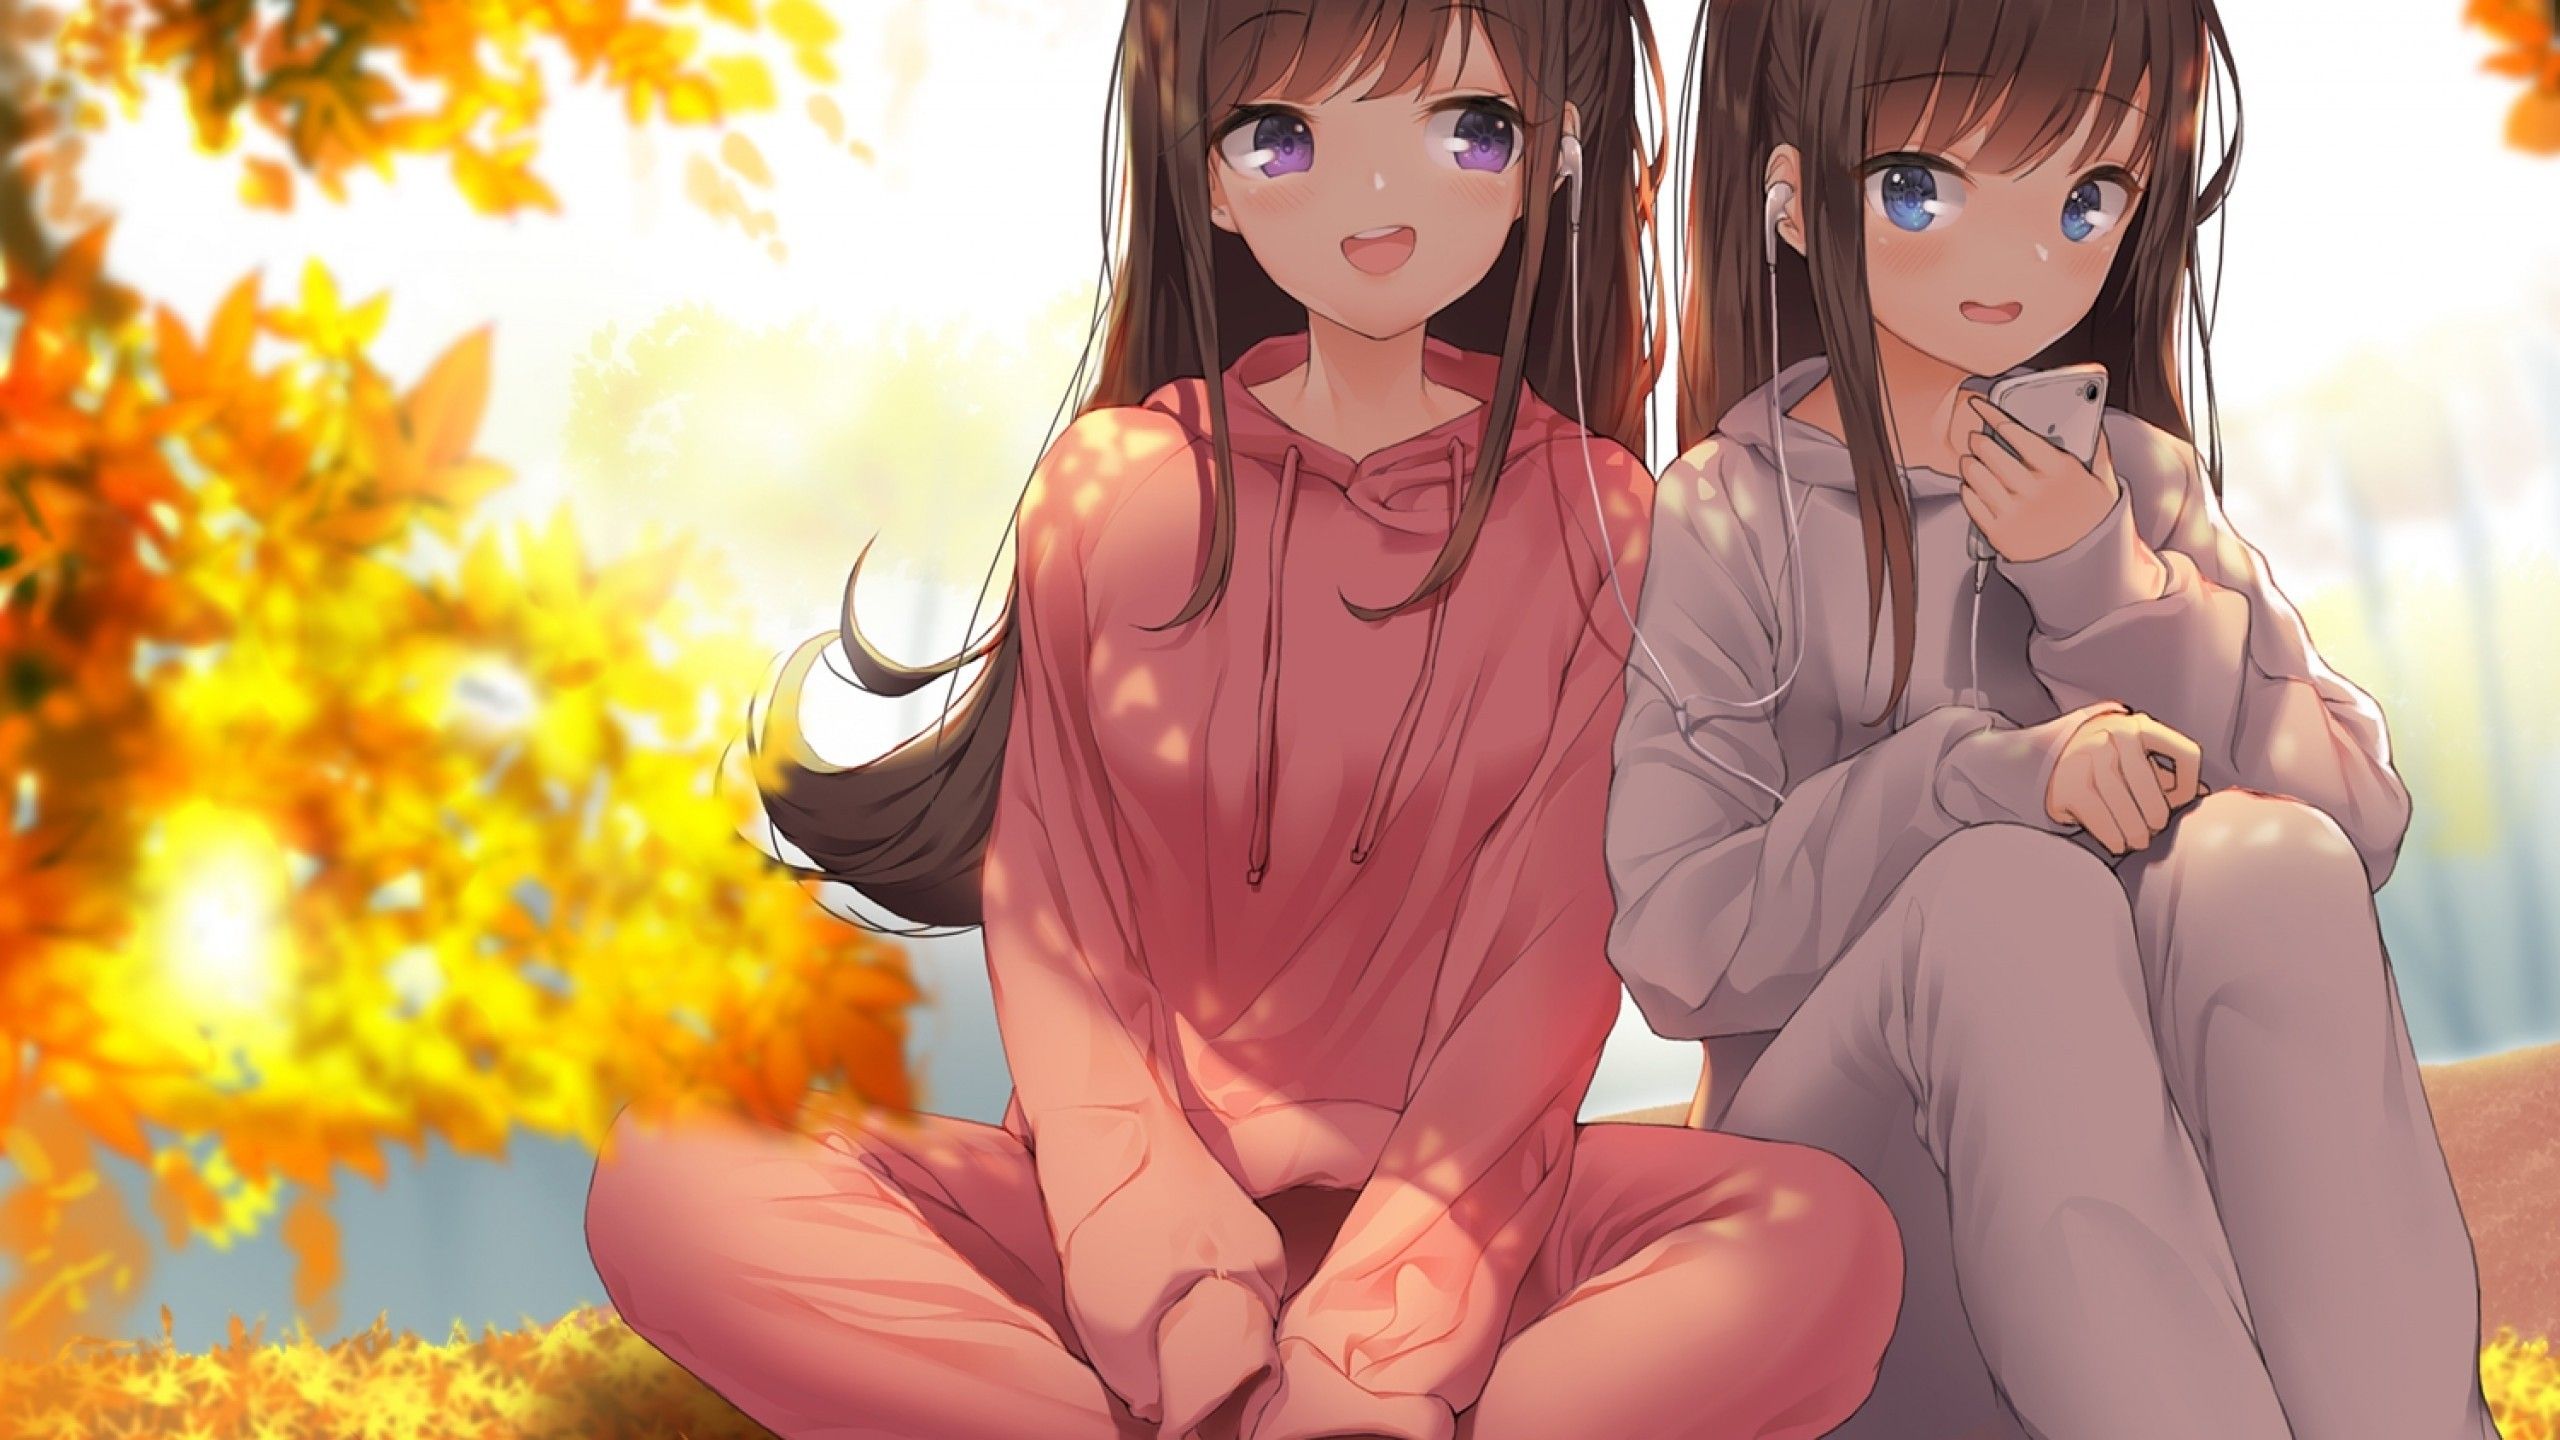 Download 2560x1440 Anime Girls, Brown Hair, Autumn, Smiling Wallpaper for iMac 27 inch